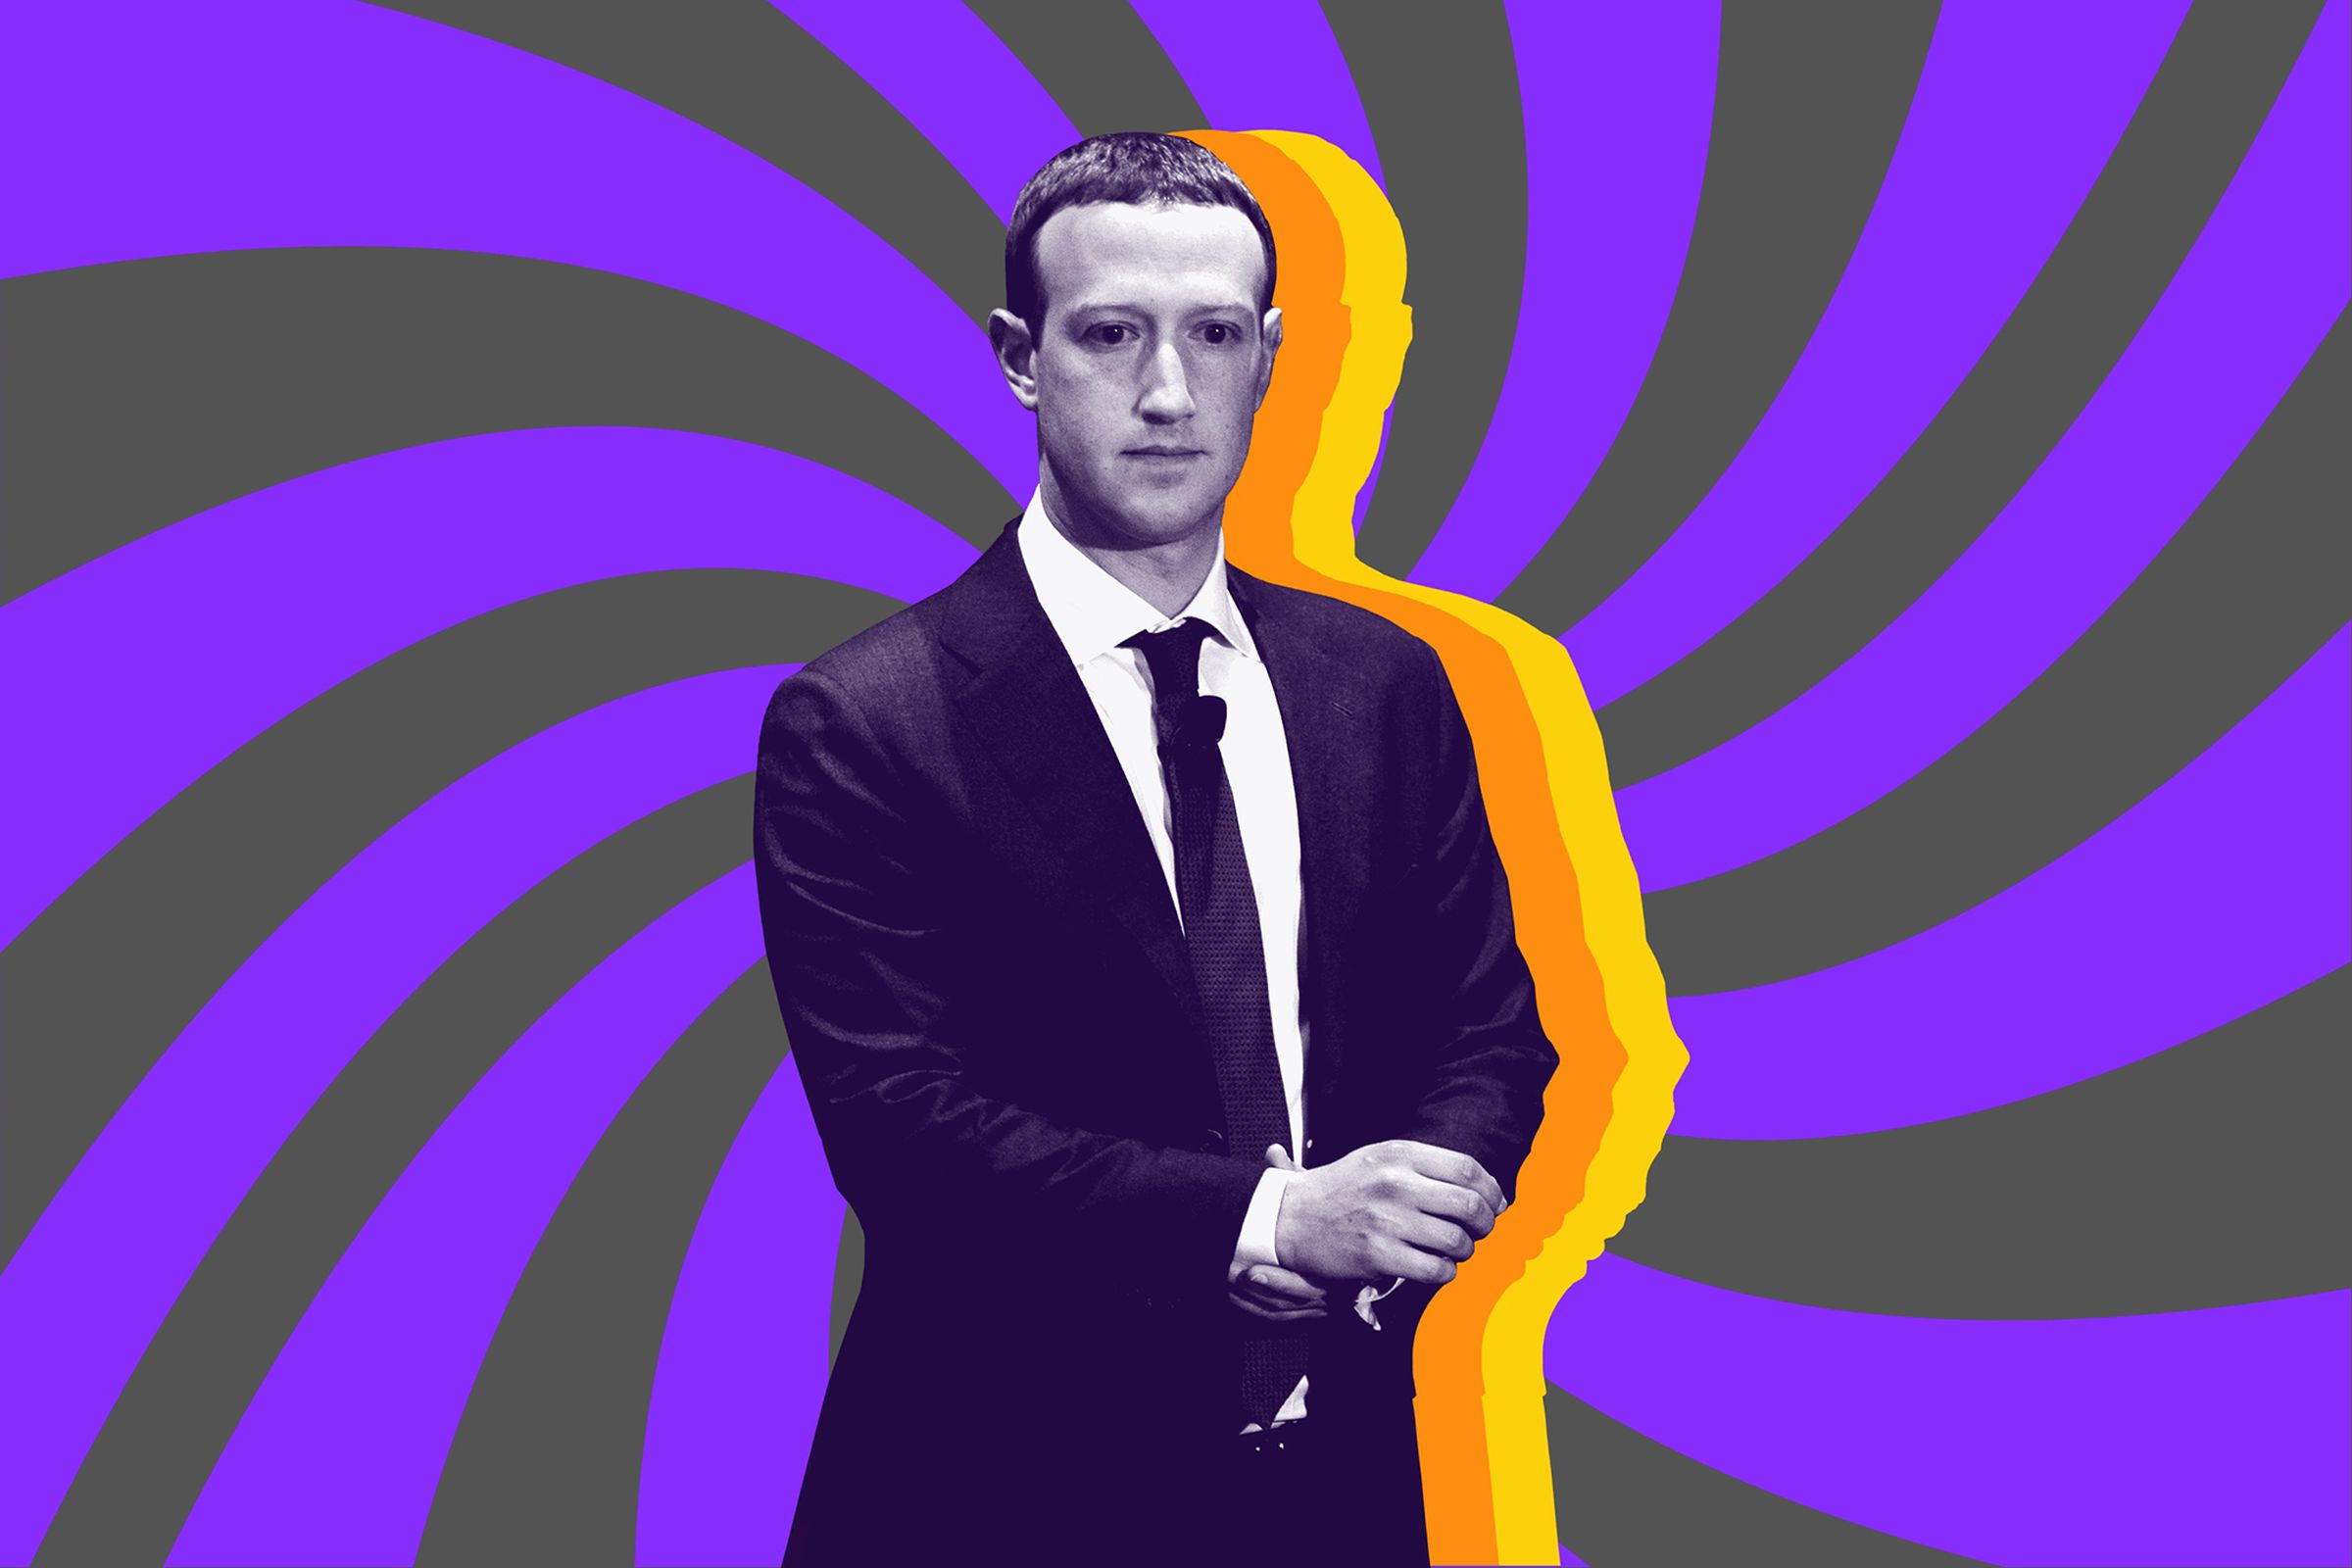 An image of Mark Zuckerberg in front of a swirling background.